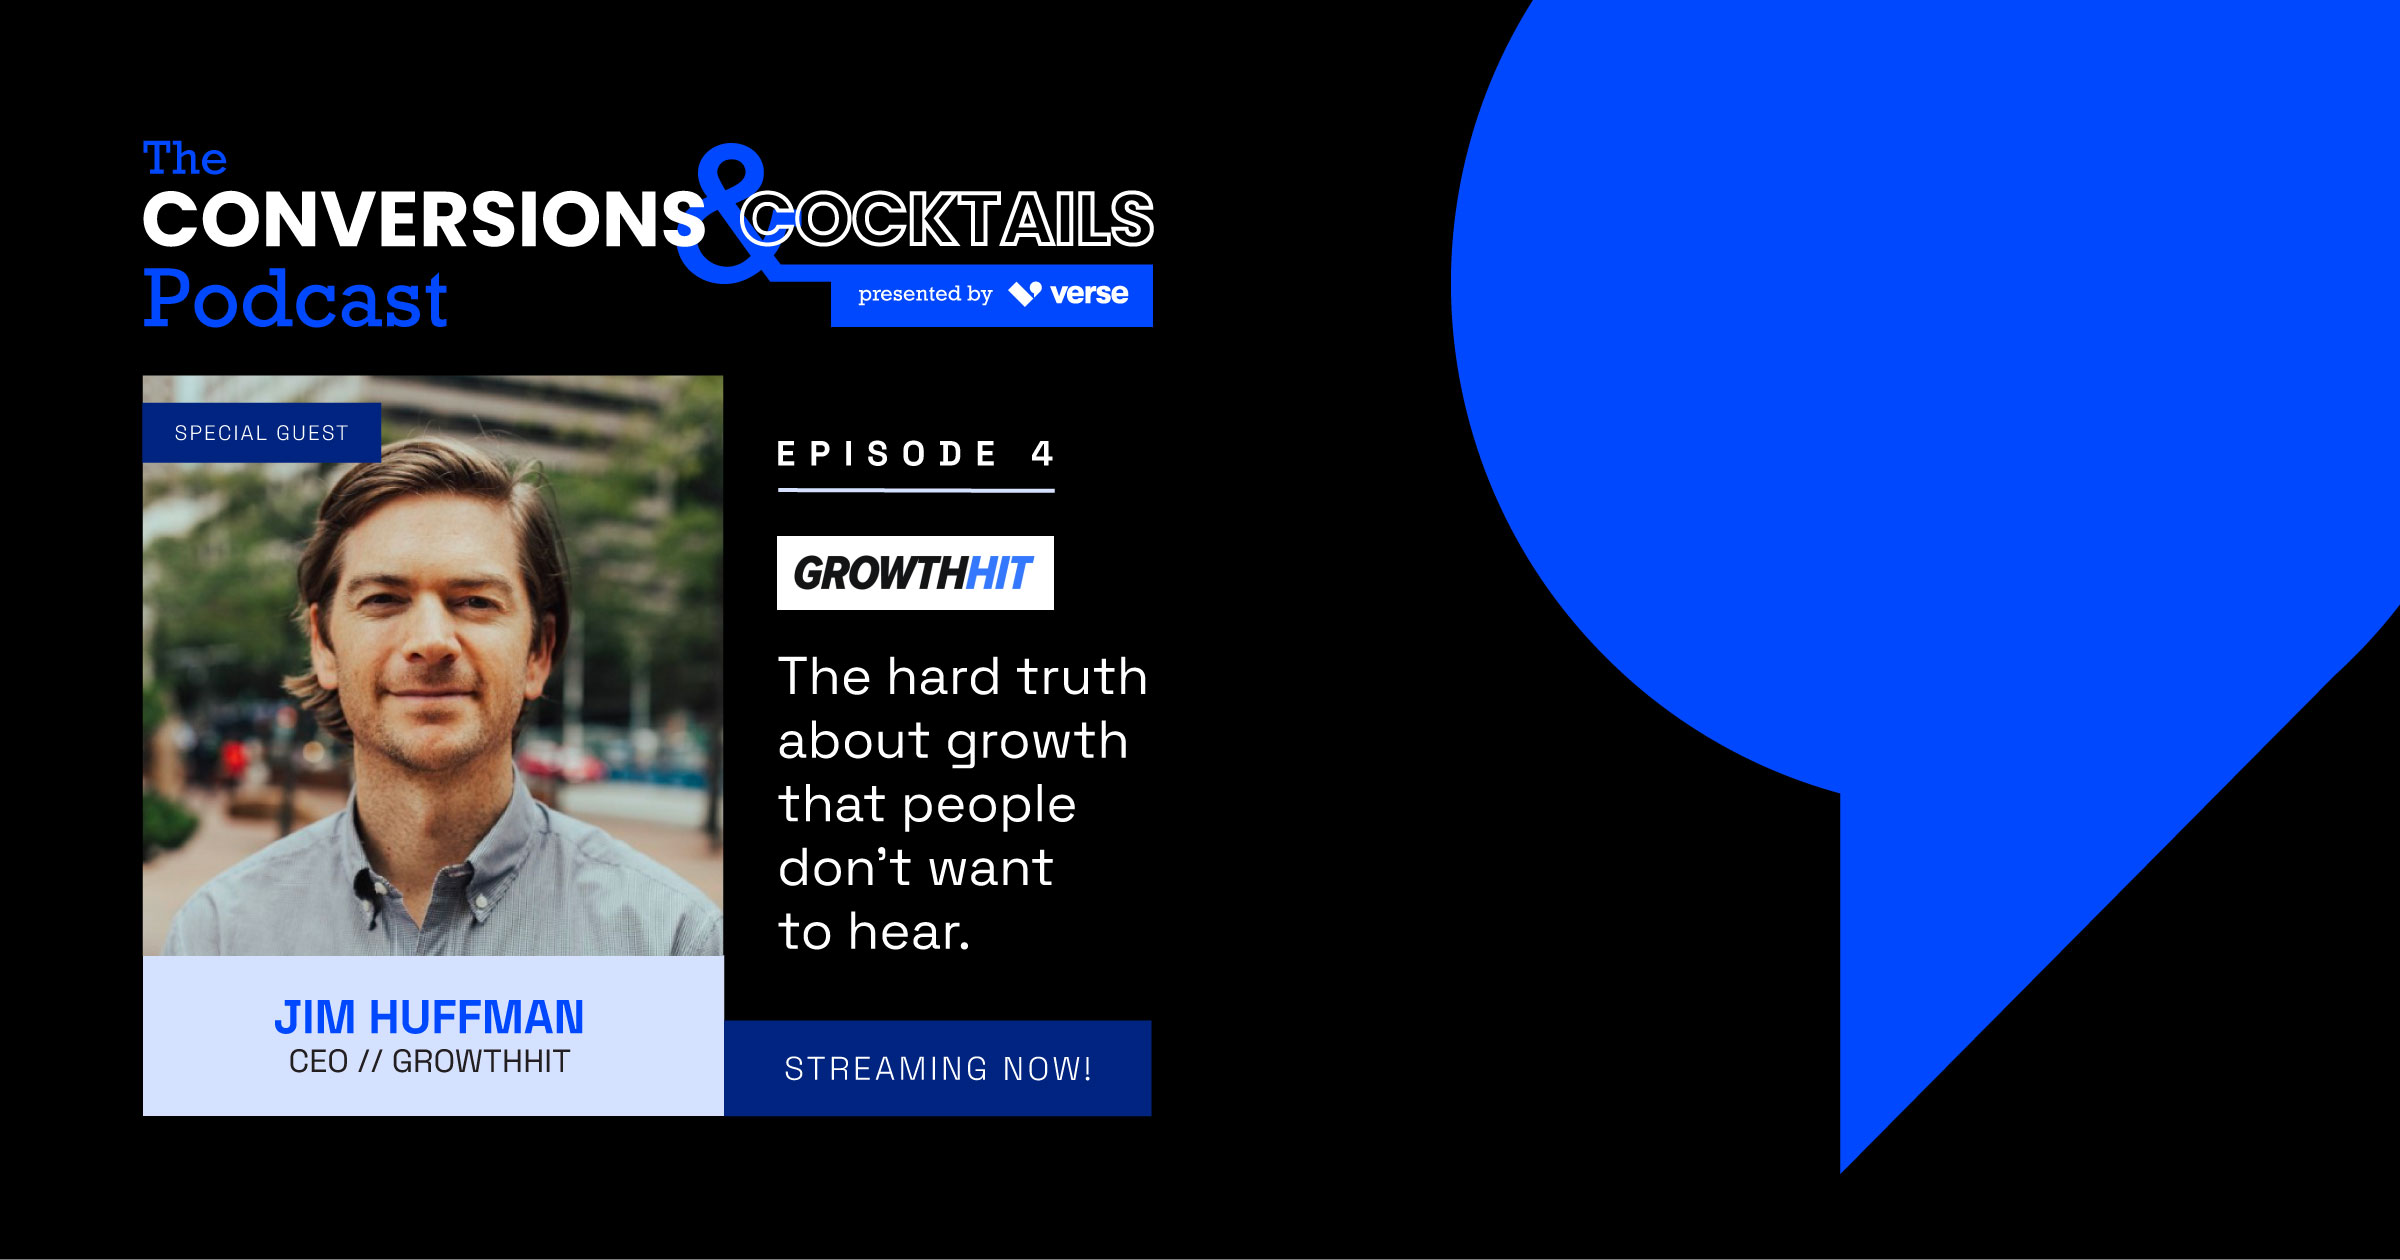 Podcast Episode 4: The hard truth about growth that people don’t want to hear Featured Image